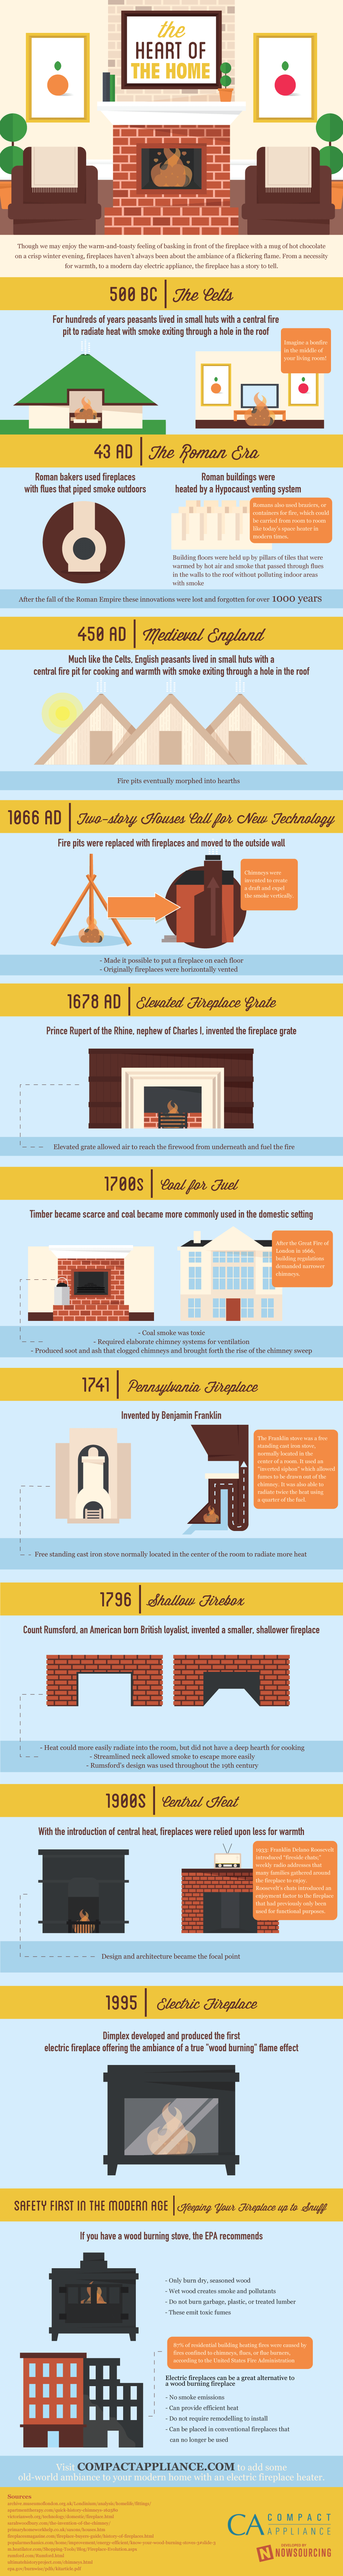 fireplace-infographic